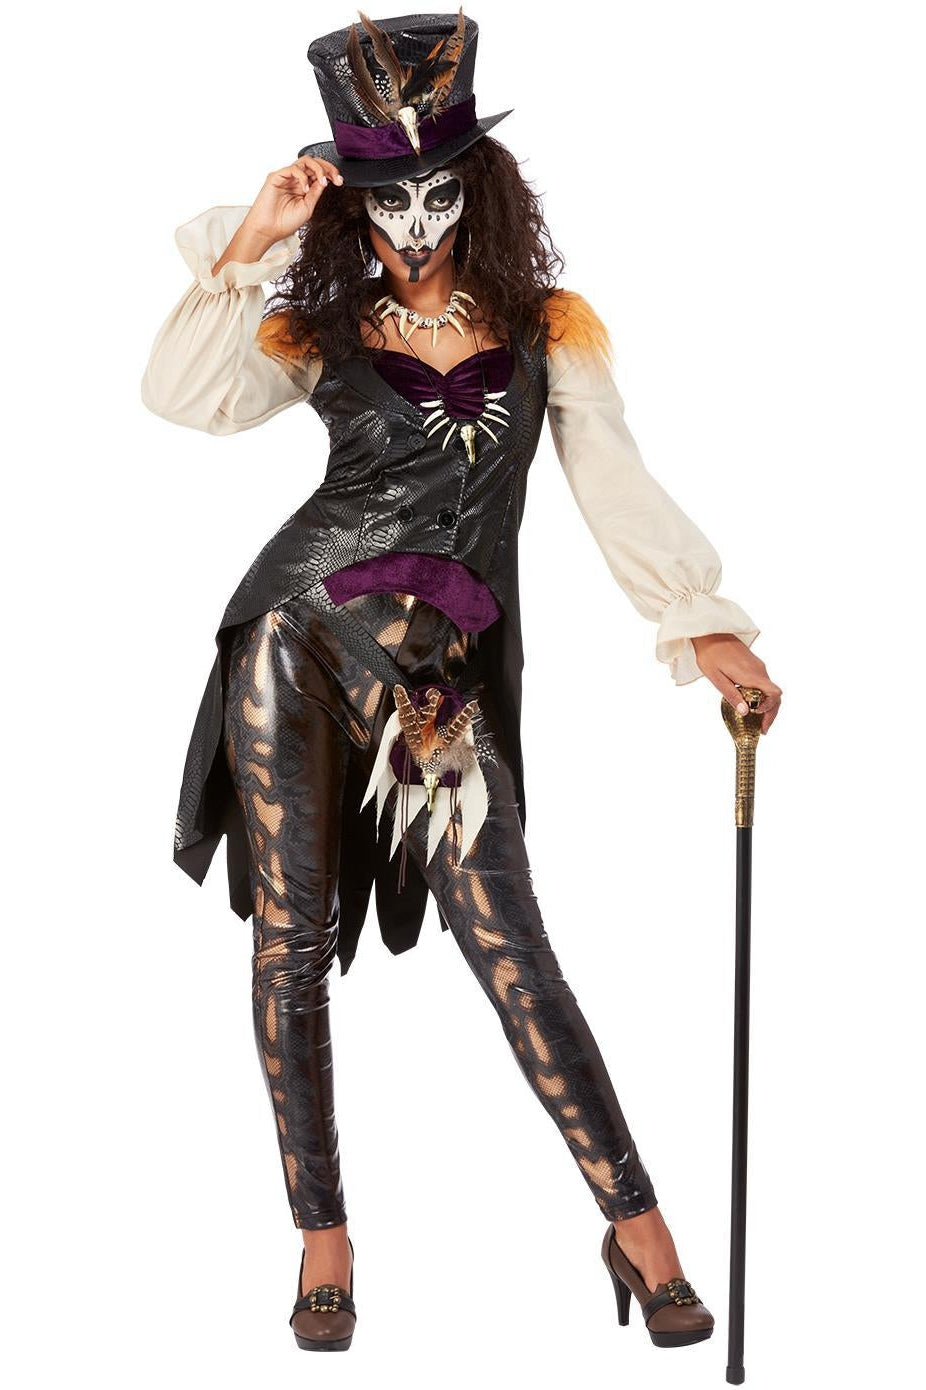 Voodoo costume, Jewelry inspiration, Witch doctor